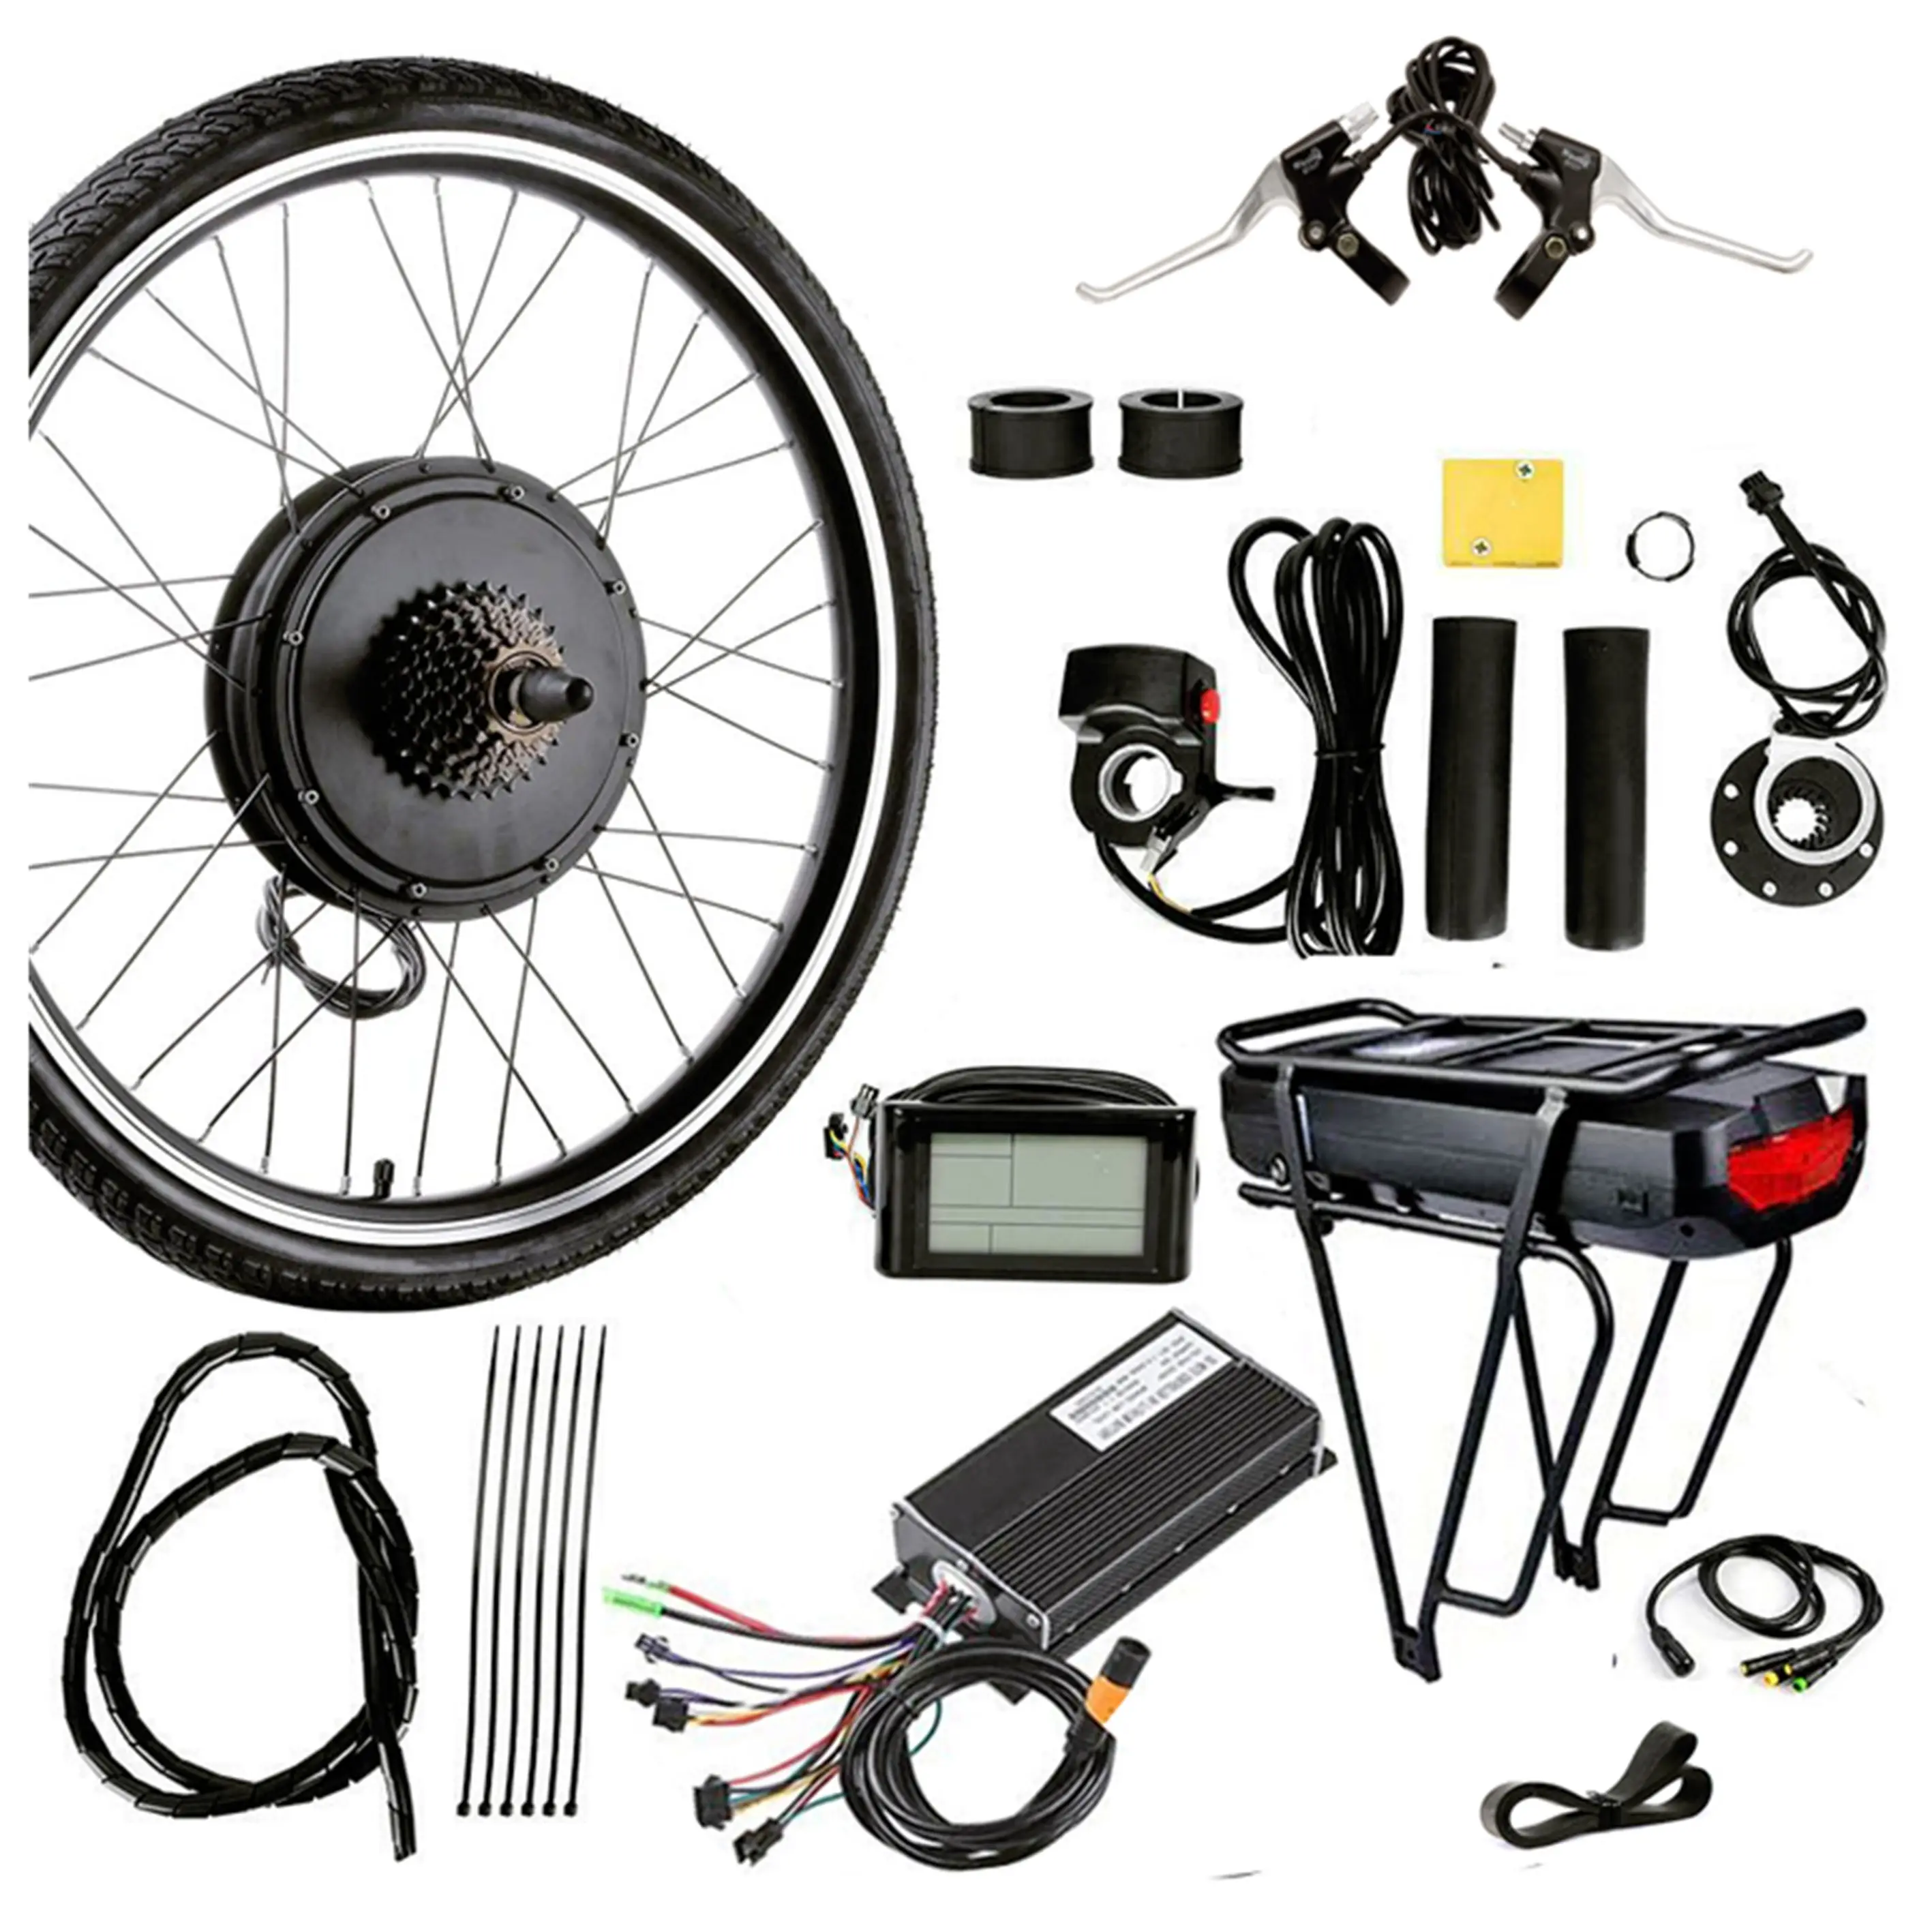 

Hot Sale 48V Ebike Conversion Kit 1000W/1500W Electric Bike Kit Other Electric Bicycle Parts